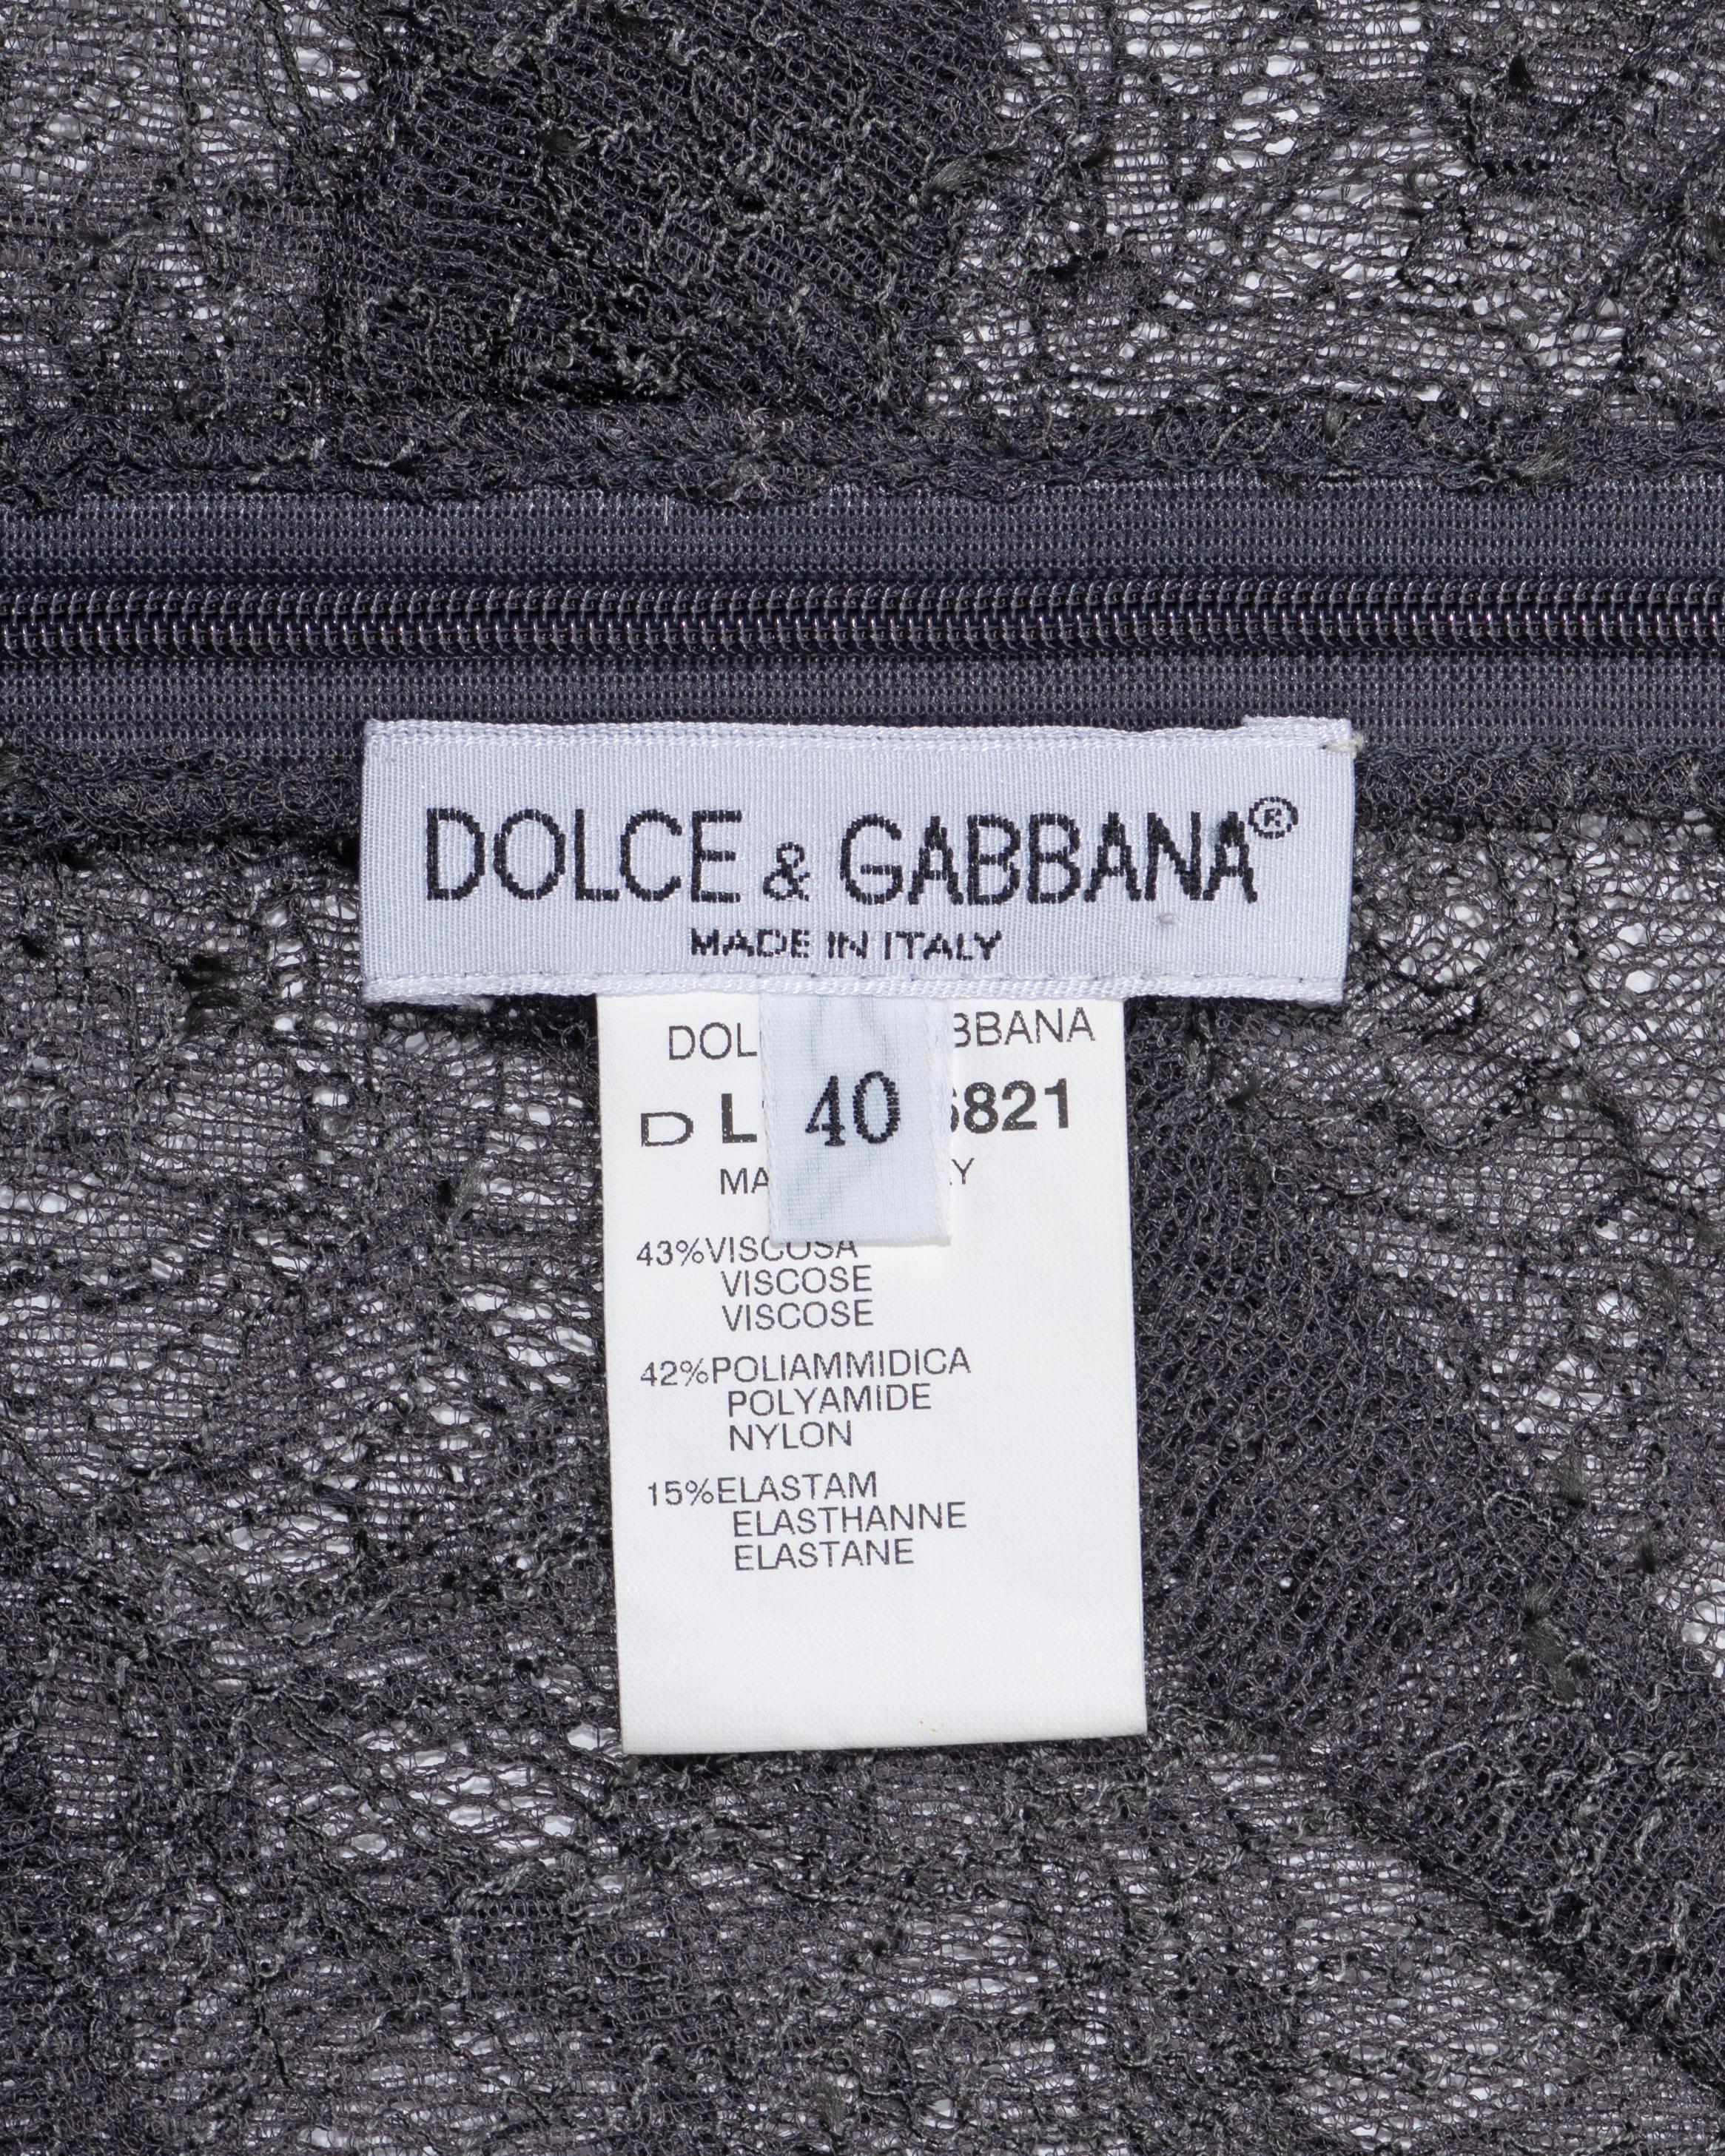 Dolce & Gabbana Grey Floral Lace Skirt with Train, ss 1999 9